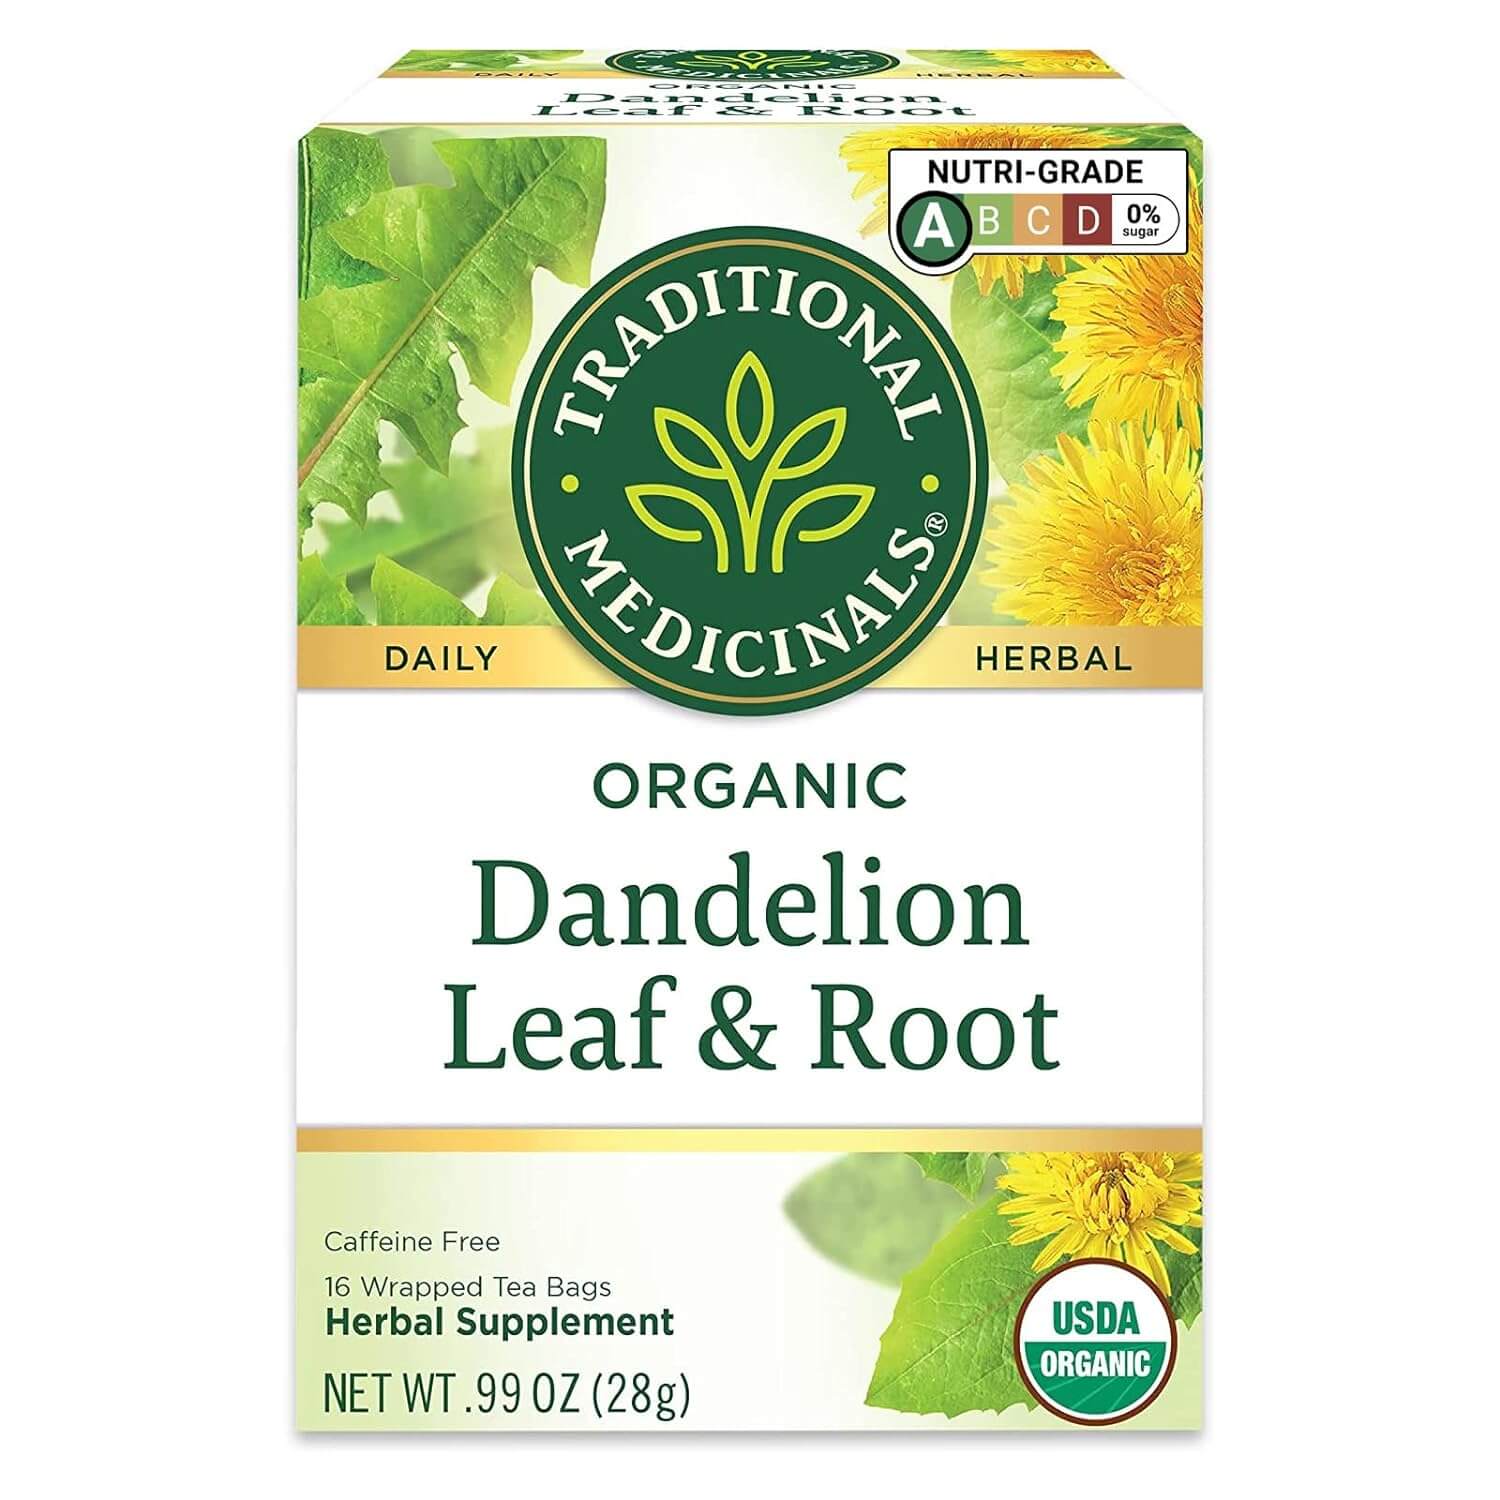 Amazon's Choice: Traditional Medicinals Dandelion Leaf and Root Tea